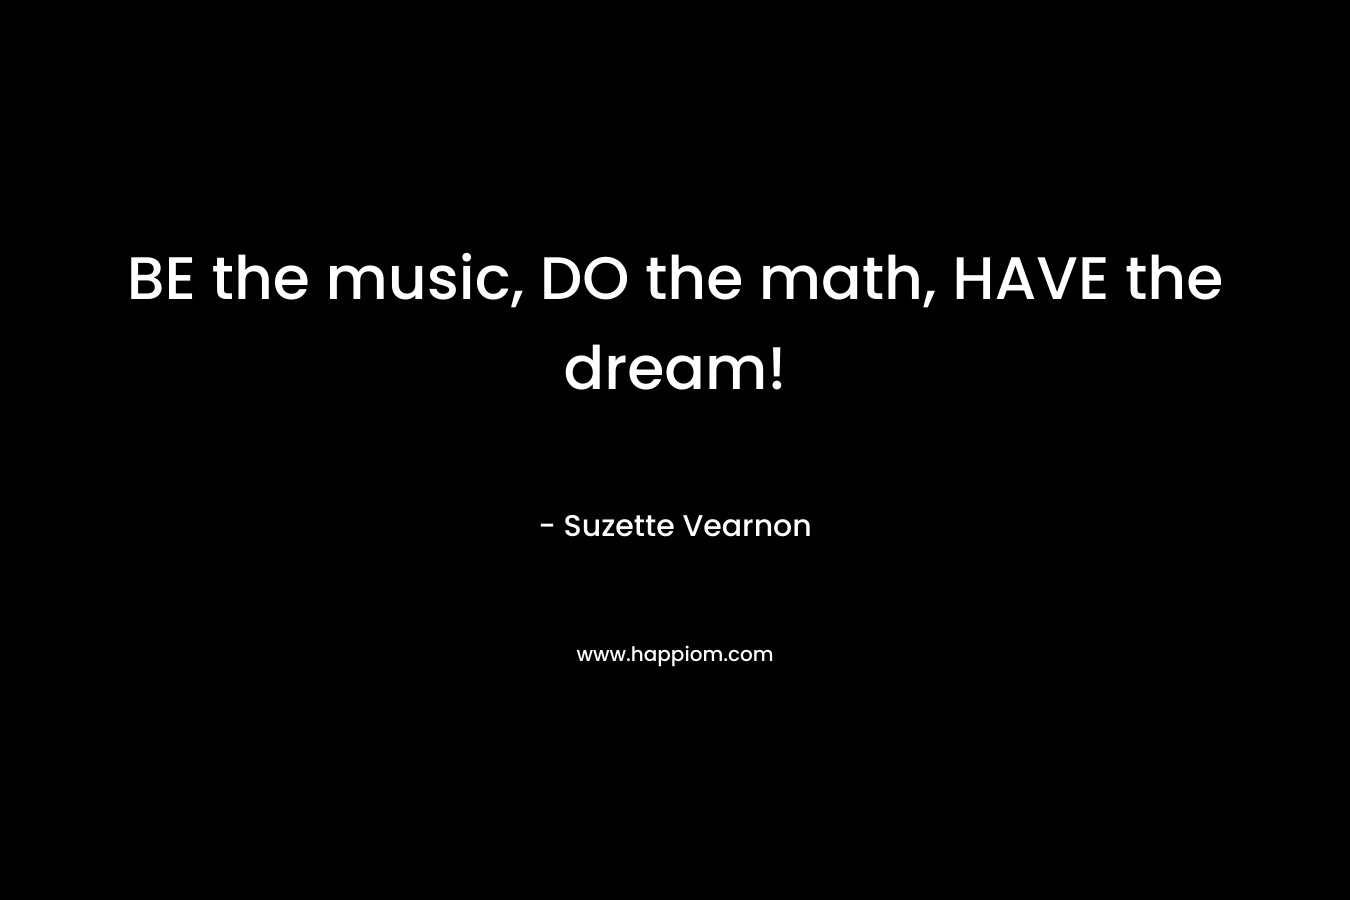 BE the music, DO the math, HAVE the dream!